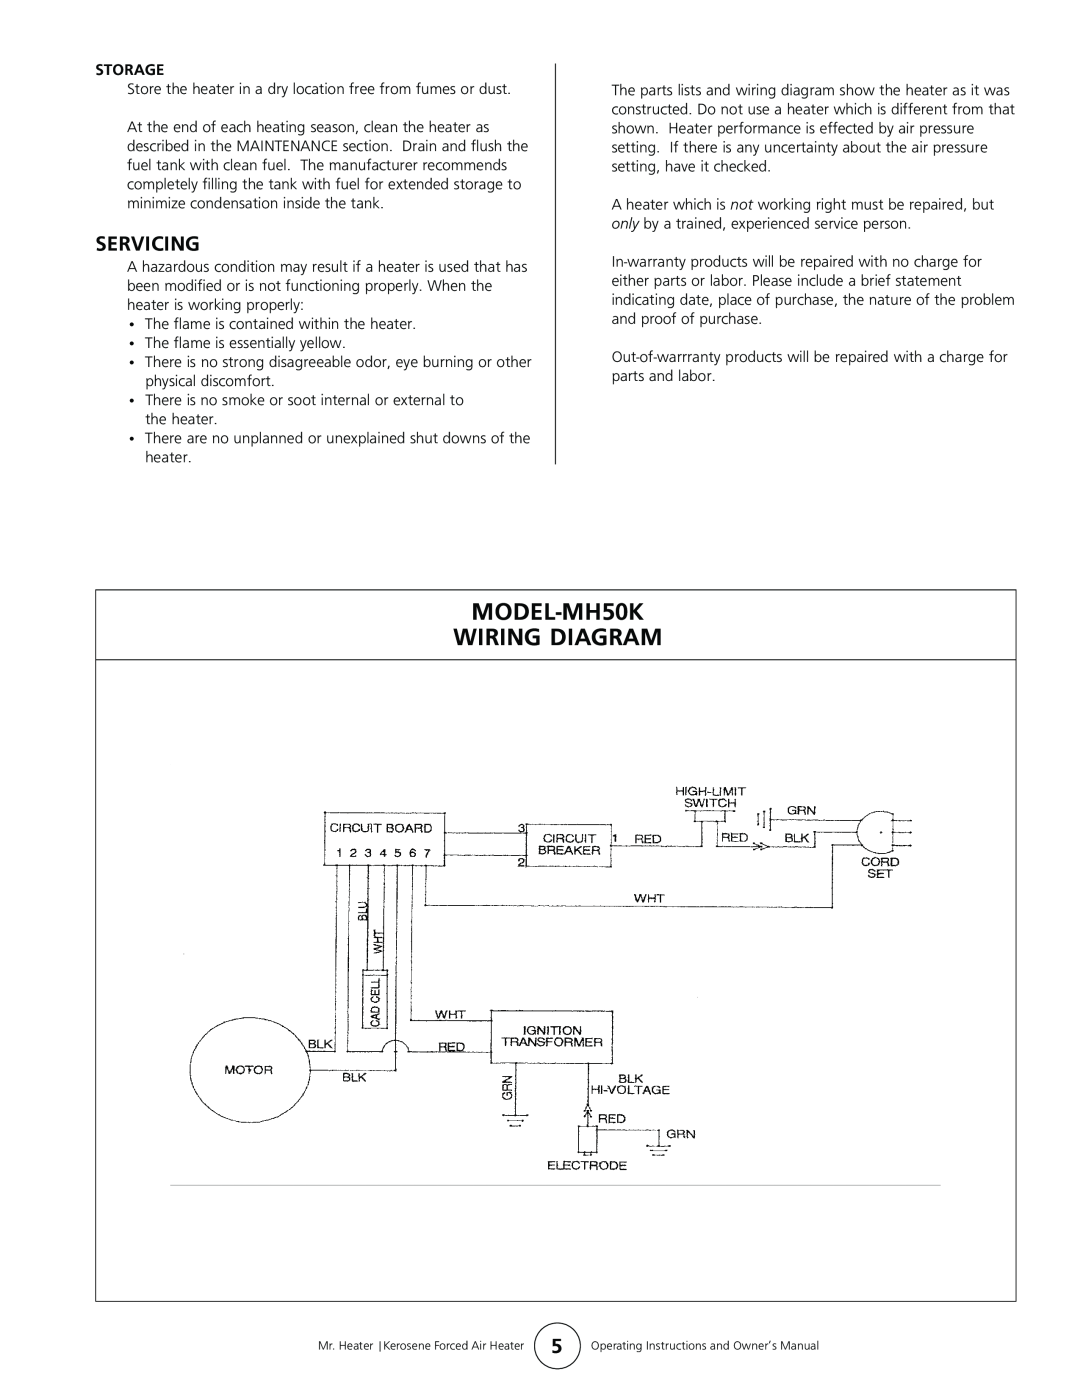 Mr. Heater operating instructions MODEL-MH50K WIRING DIAGRAM, Servicing, Storage 